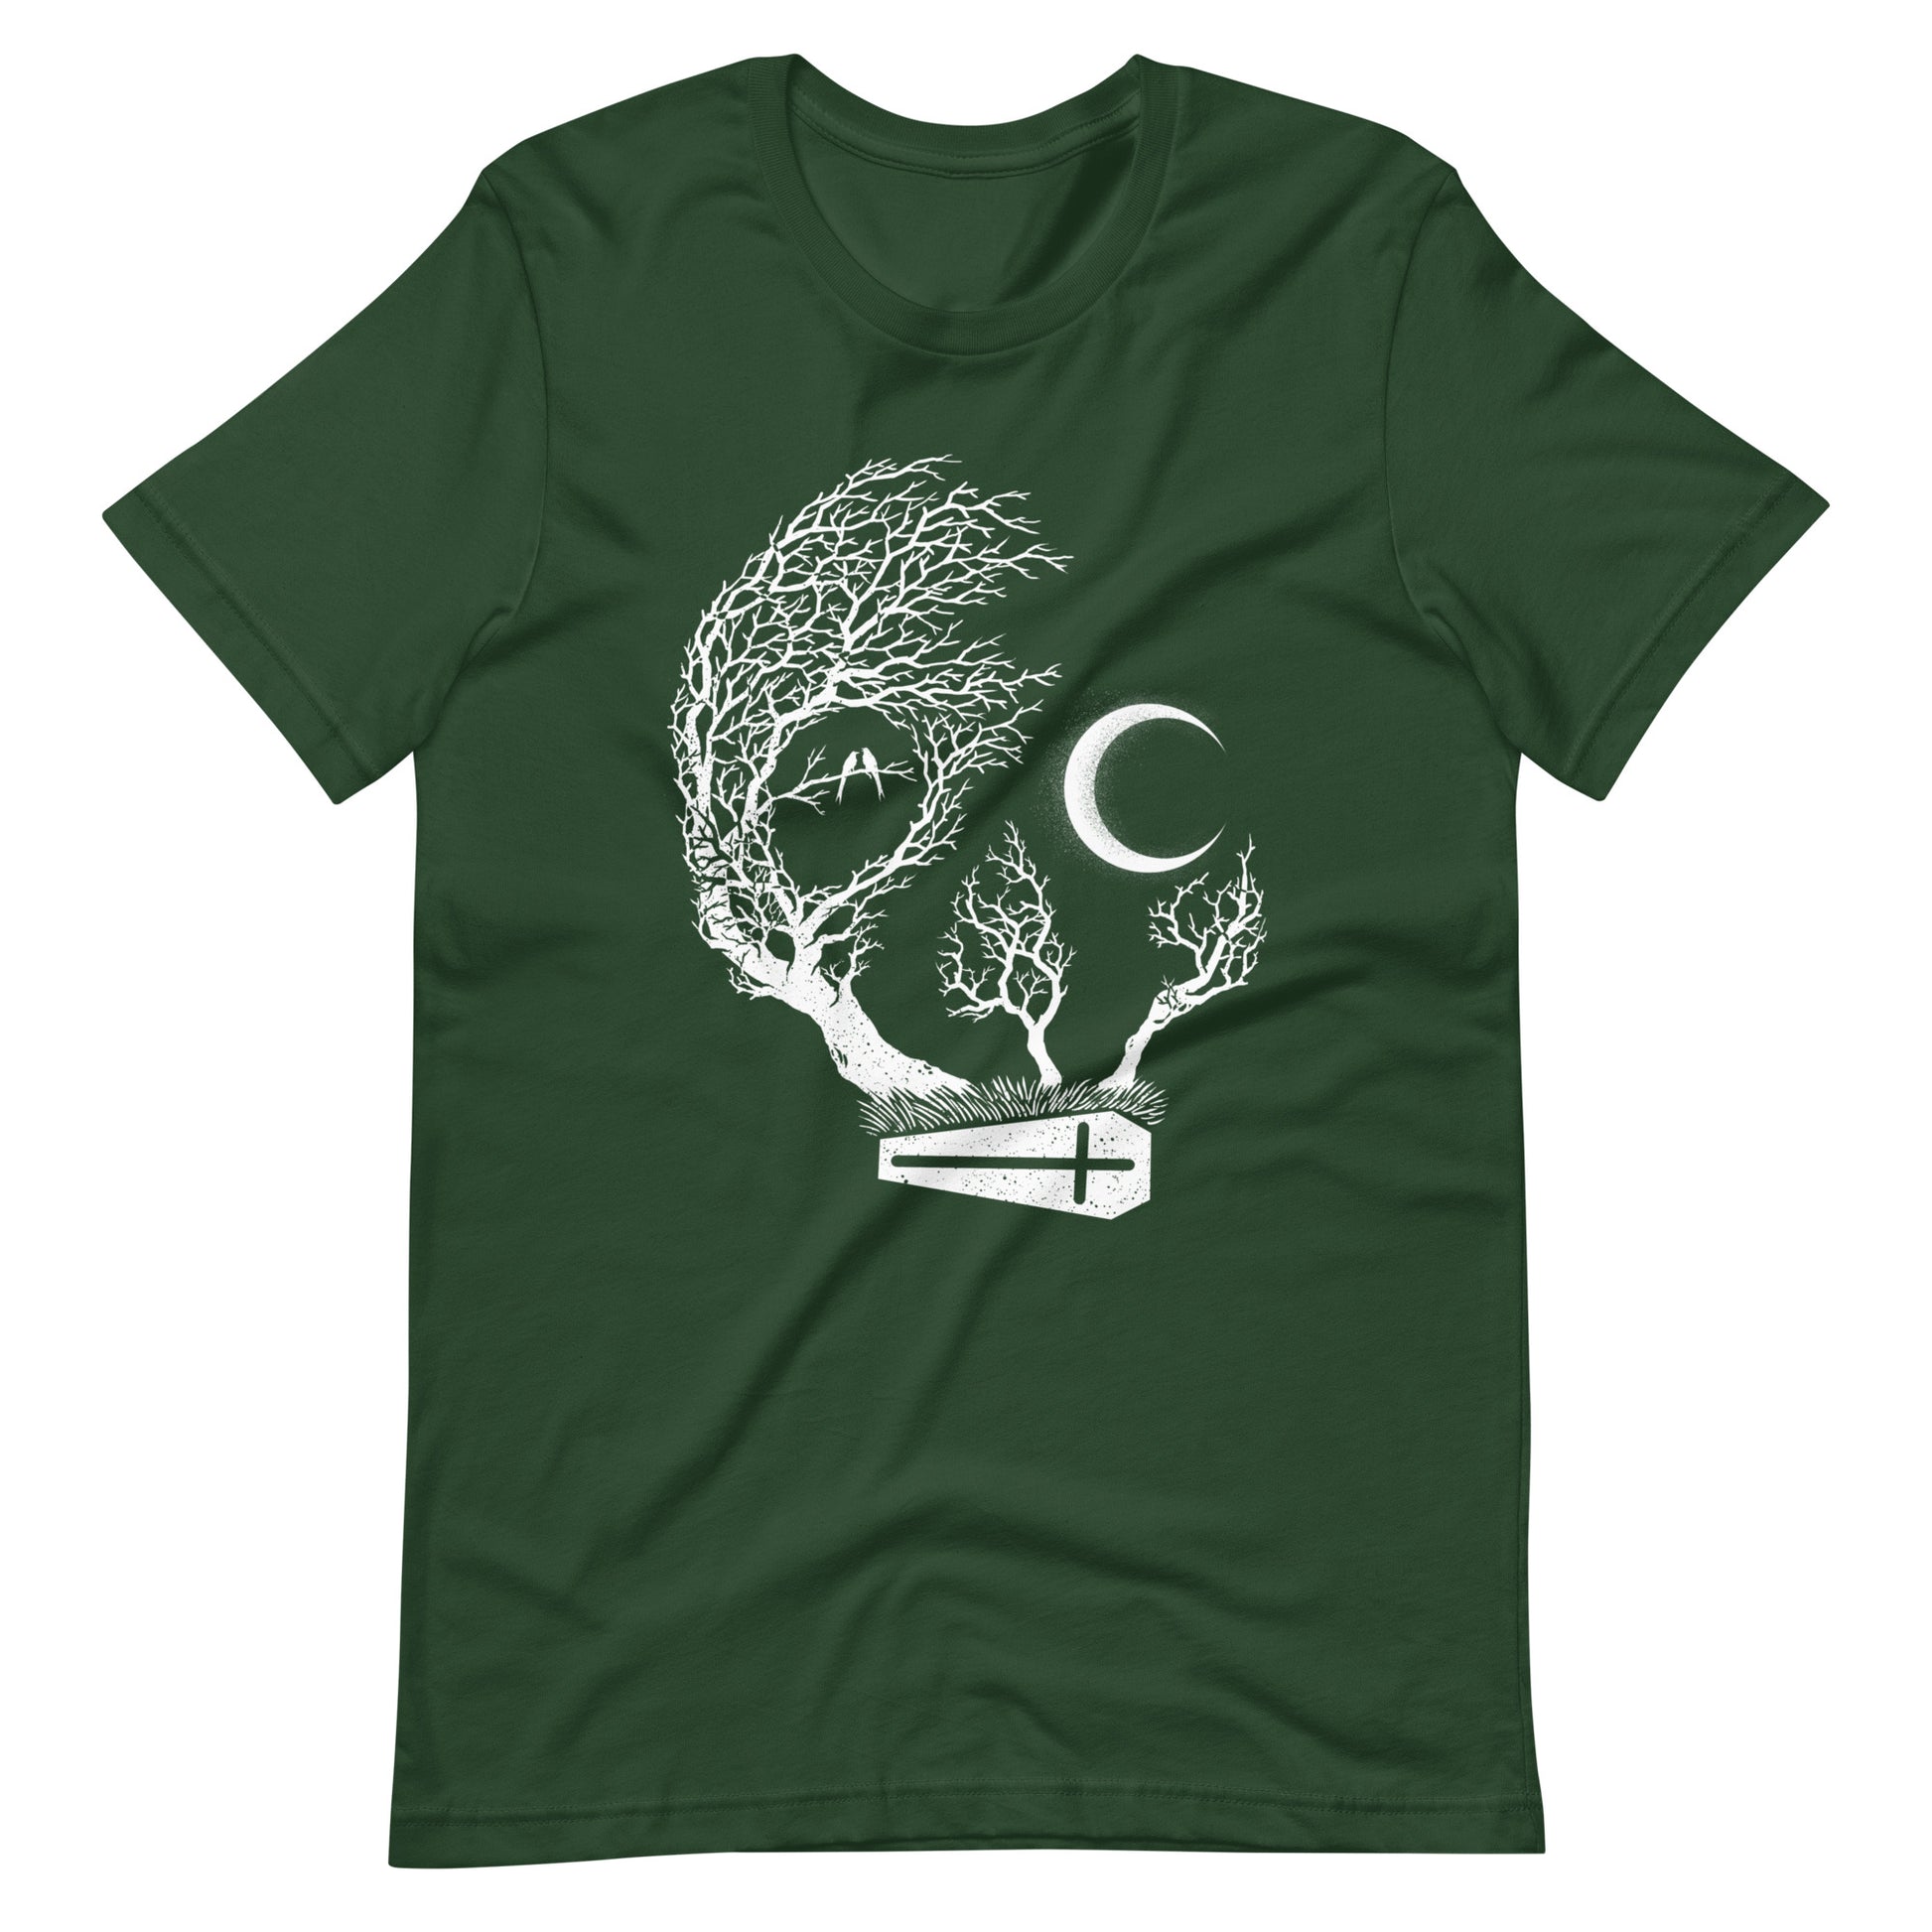 Friday Night Death - Men's t-shirt - Forest Front